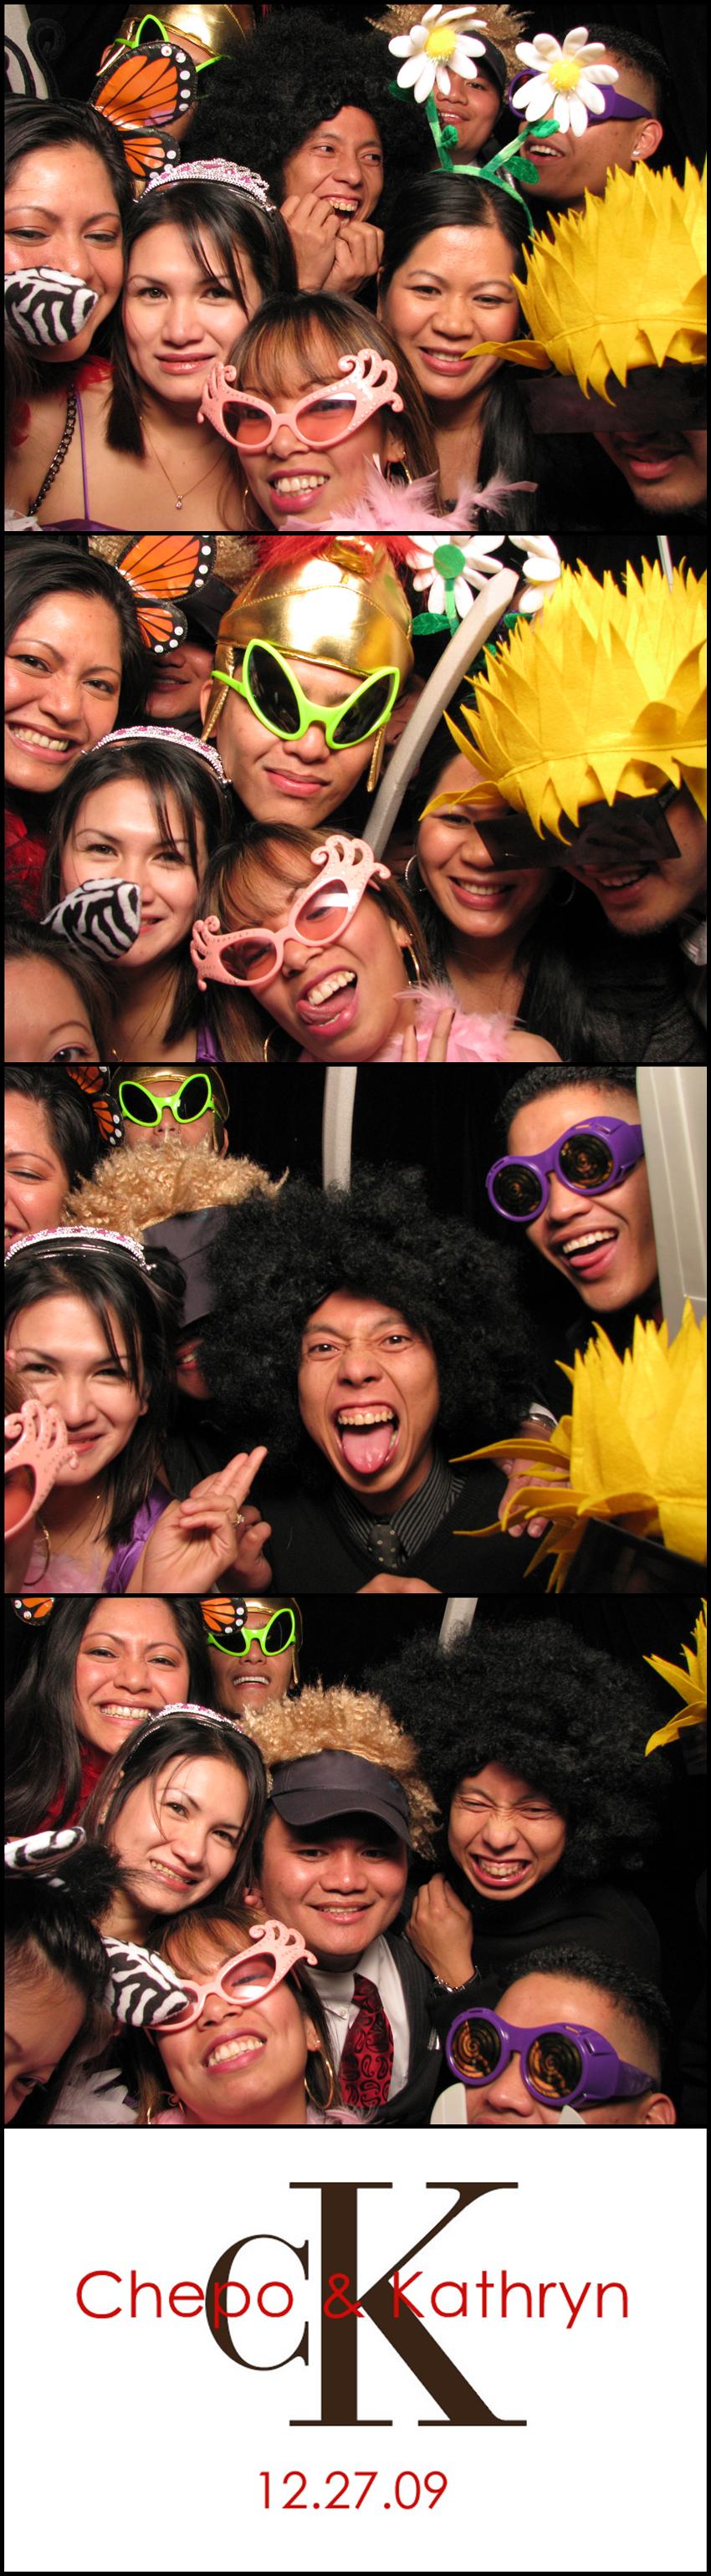 props in the photobooth